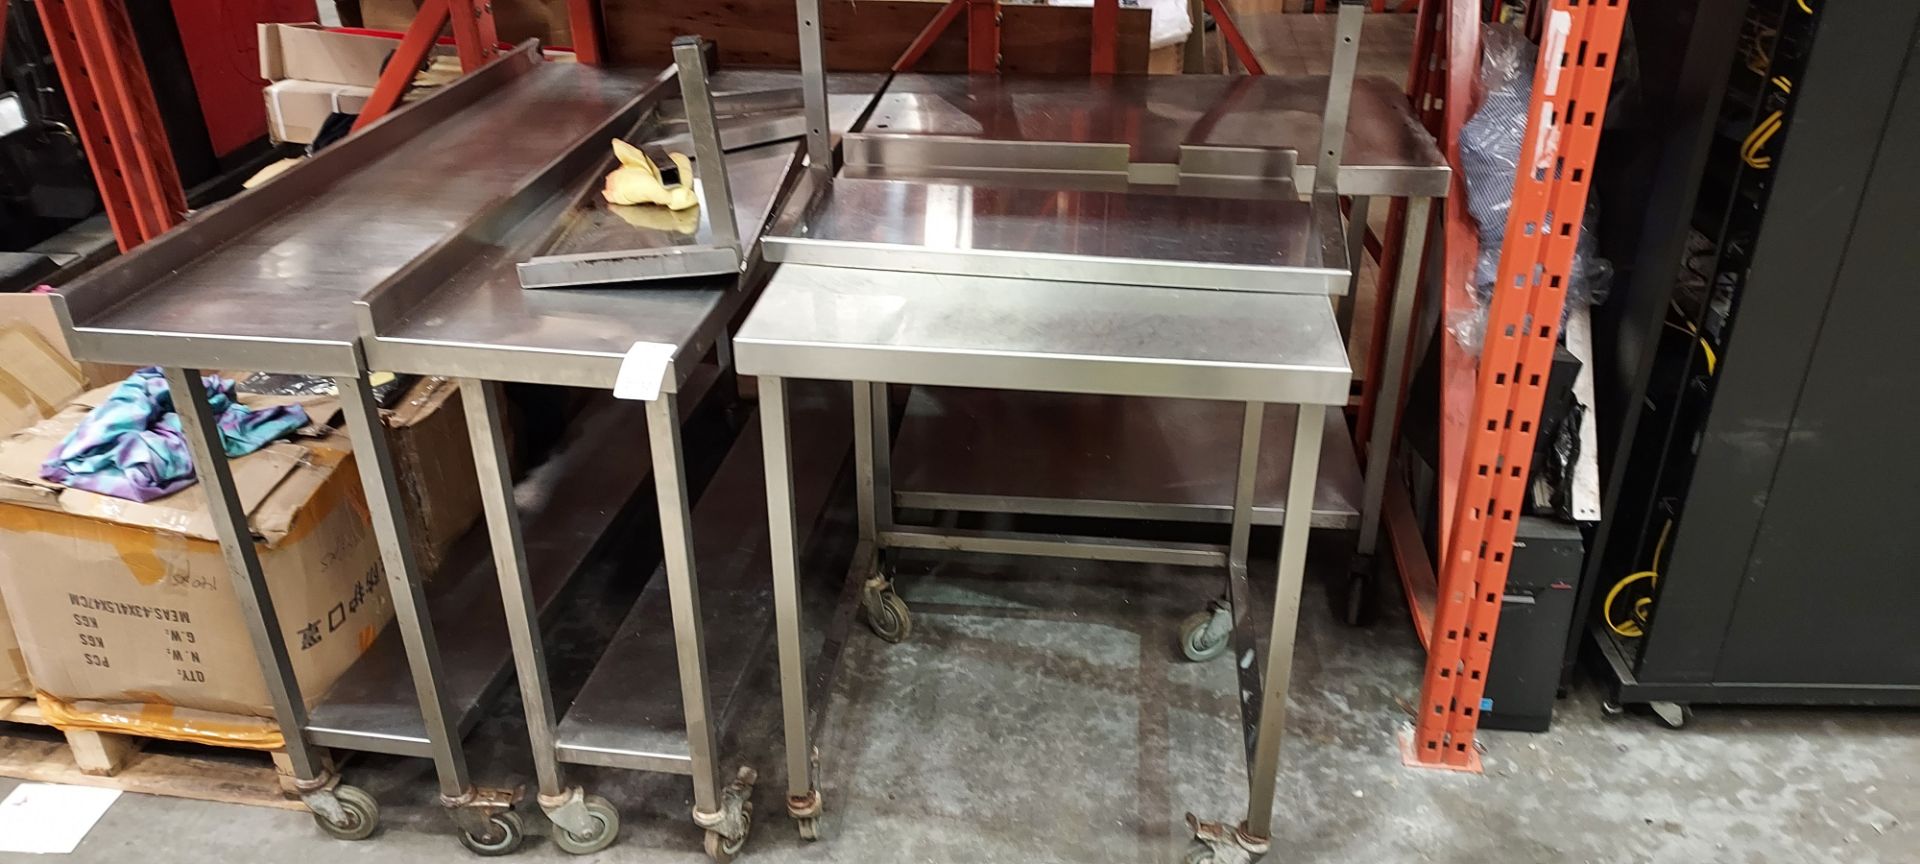 4 PIECE STAINLESS STEEL PREP TABLES - ALL ON WHEELS 2 X ( 90 CM HEIGHT X 140 CM WIDTH X 40 CM